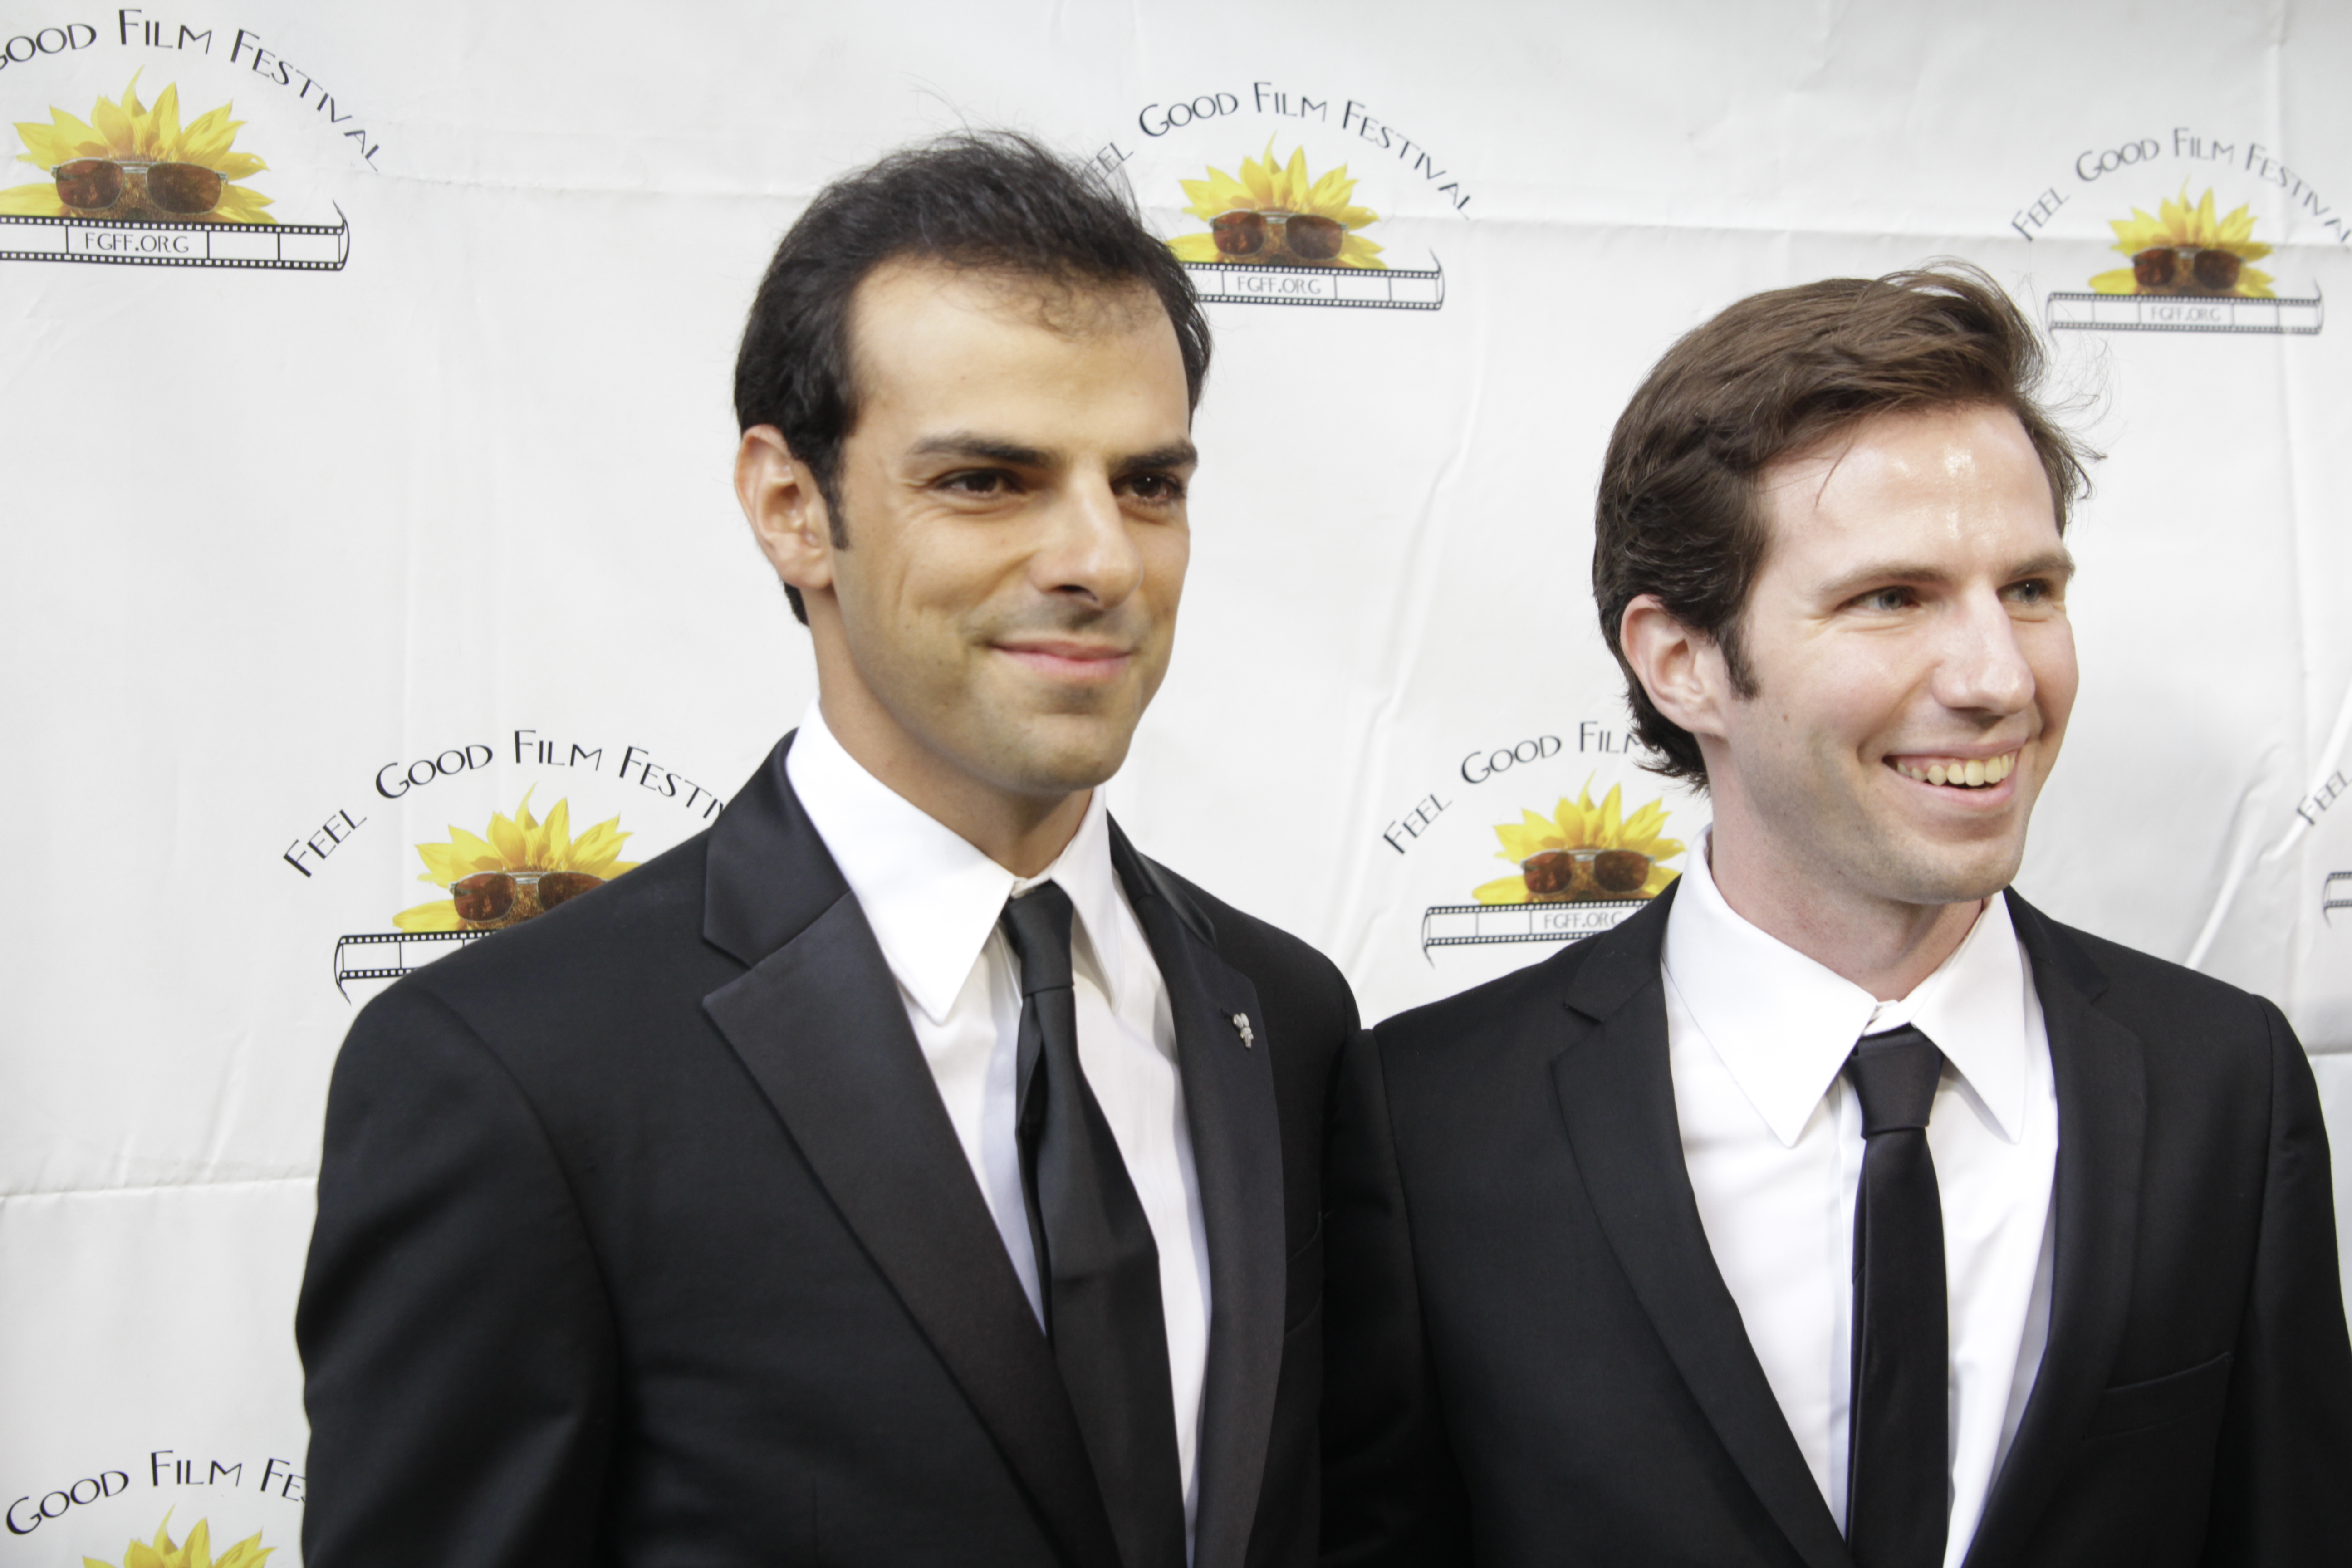 Russell Bailey and Alan Vidali on the red carpet for the premiere of BARMY at the Feel Good Film Festival.